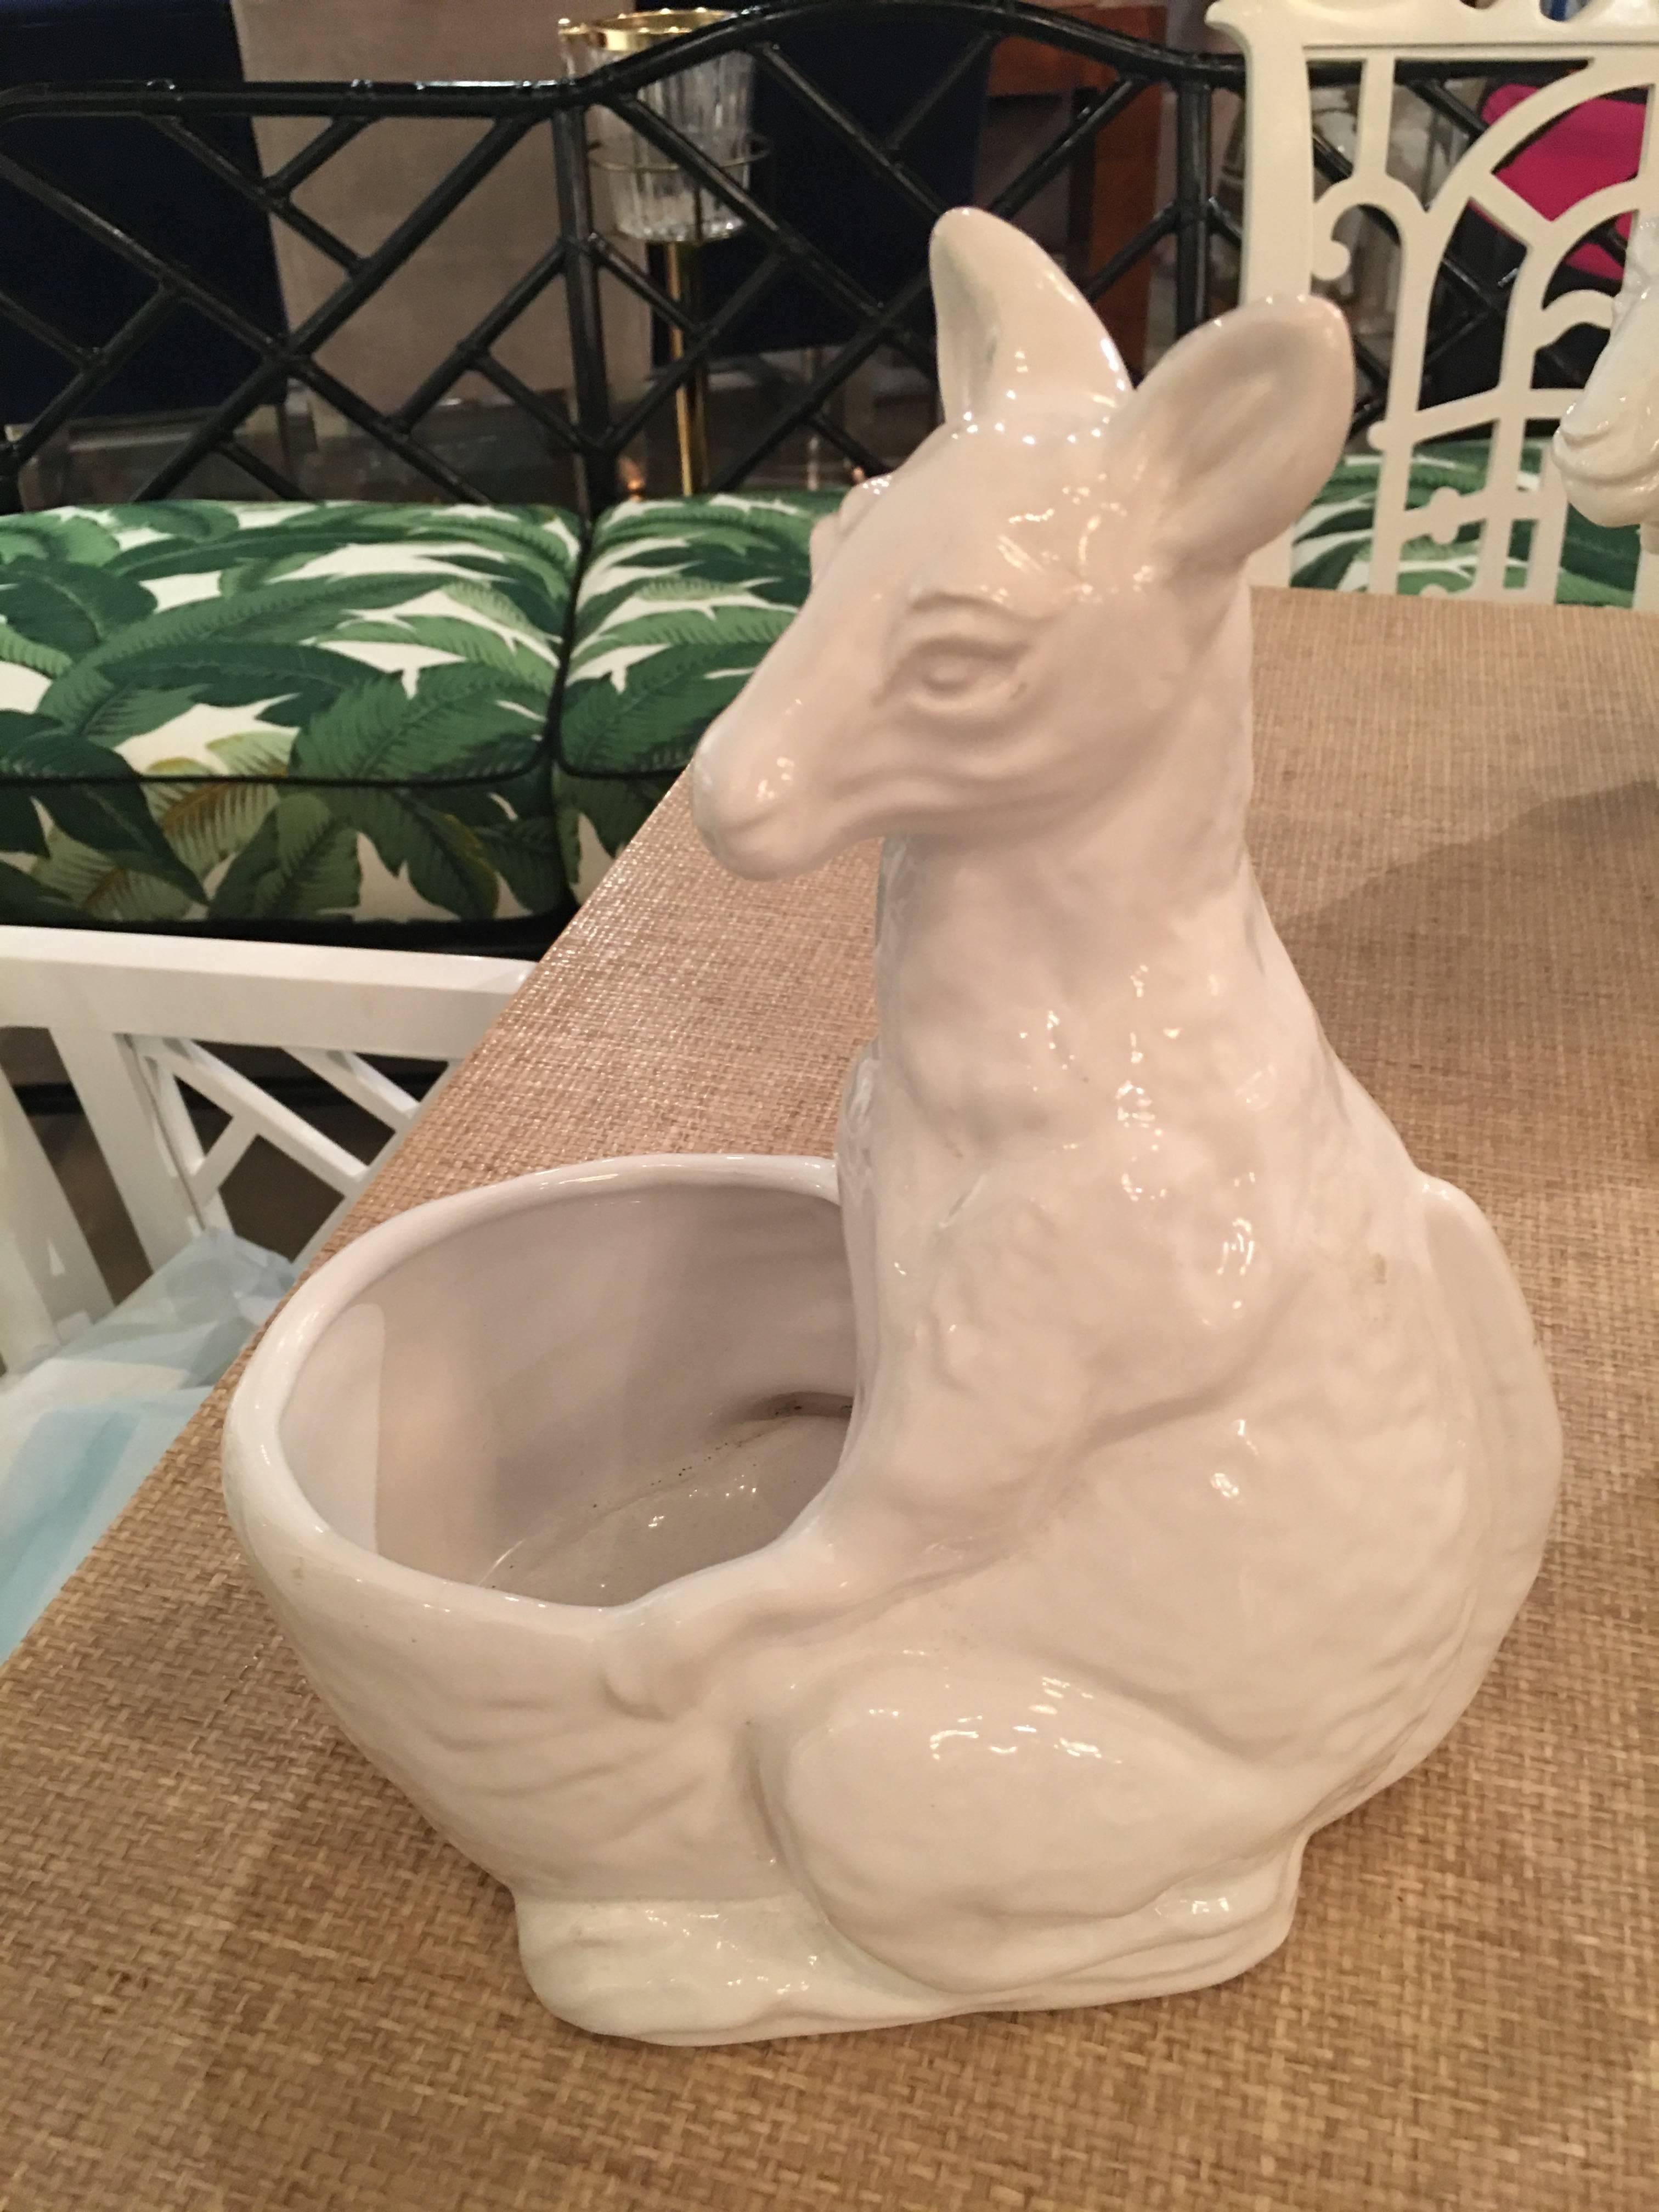 Kangaroo Ceramic Planter Pot Made in Italy Bonwit Teller Italian Statue Vintage In Excellent Condition For Sale In West Palm Beach, FL